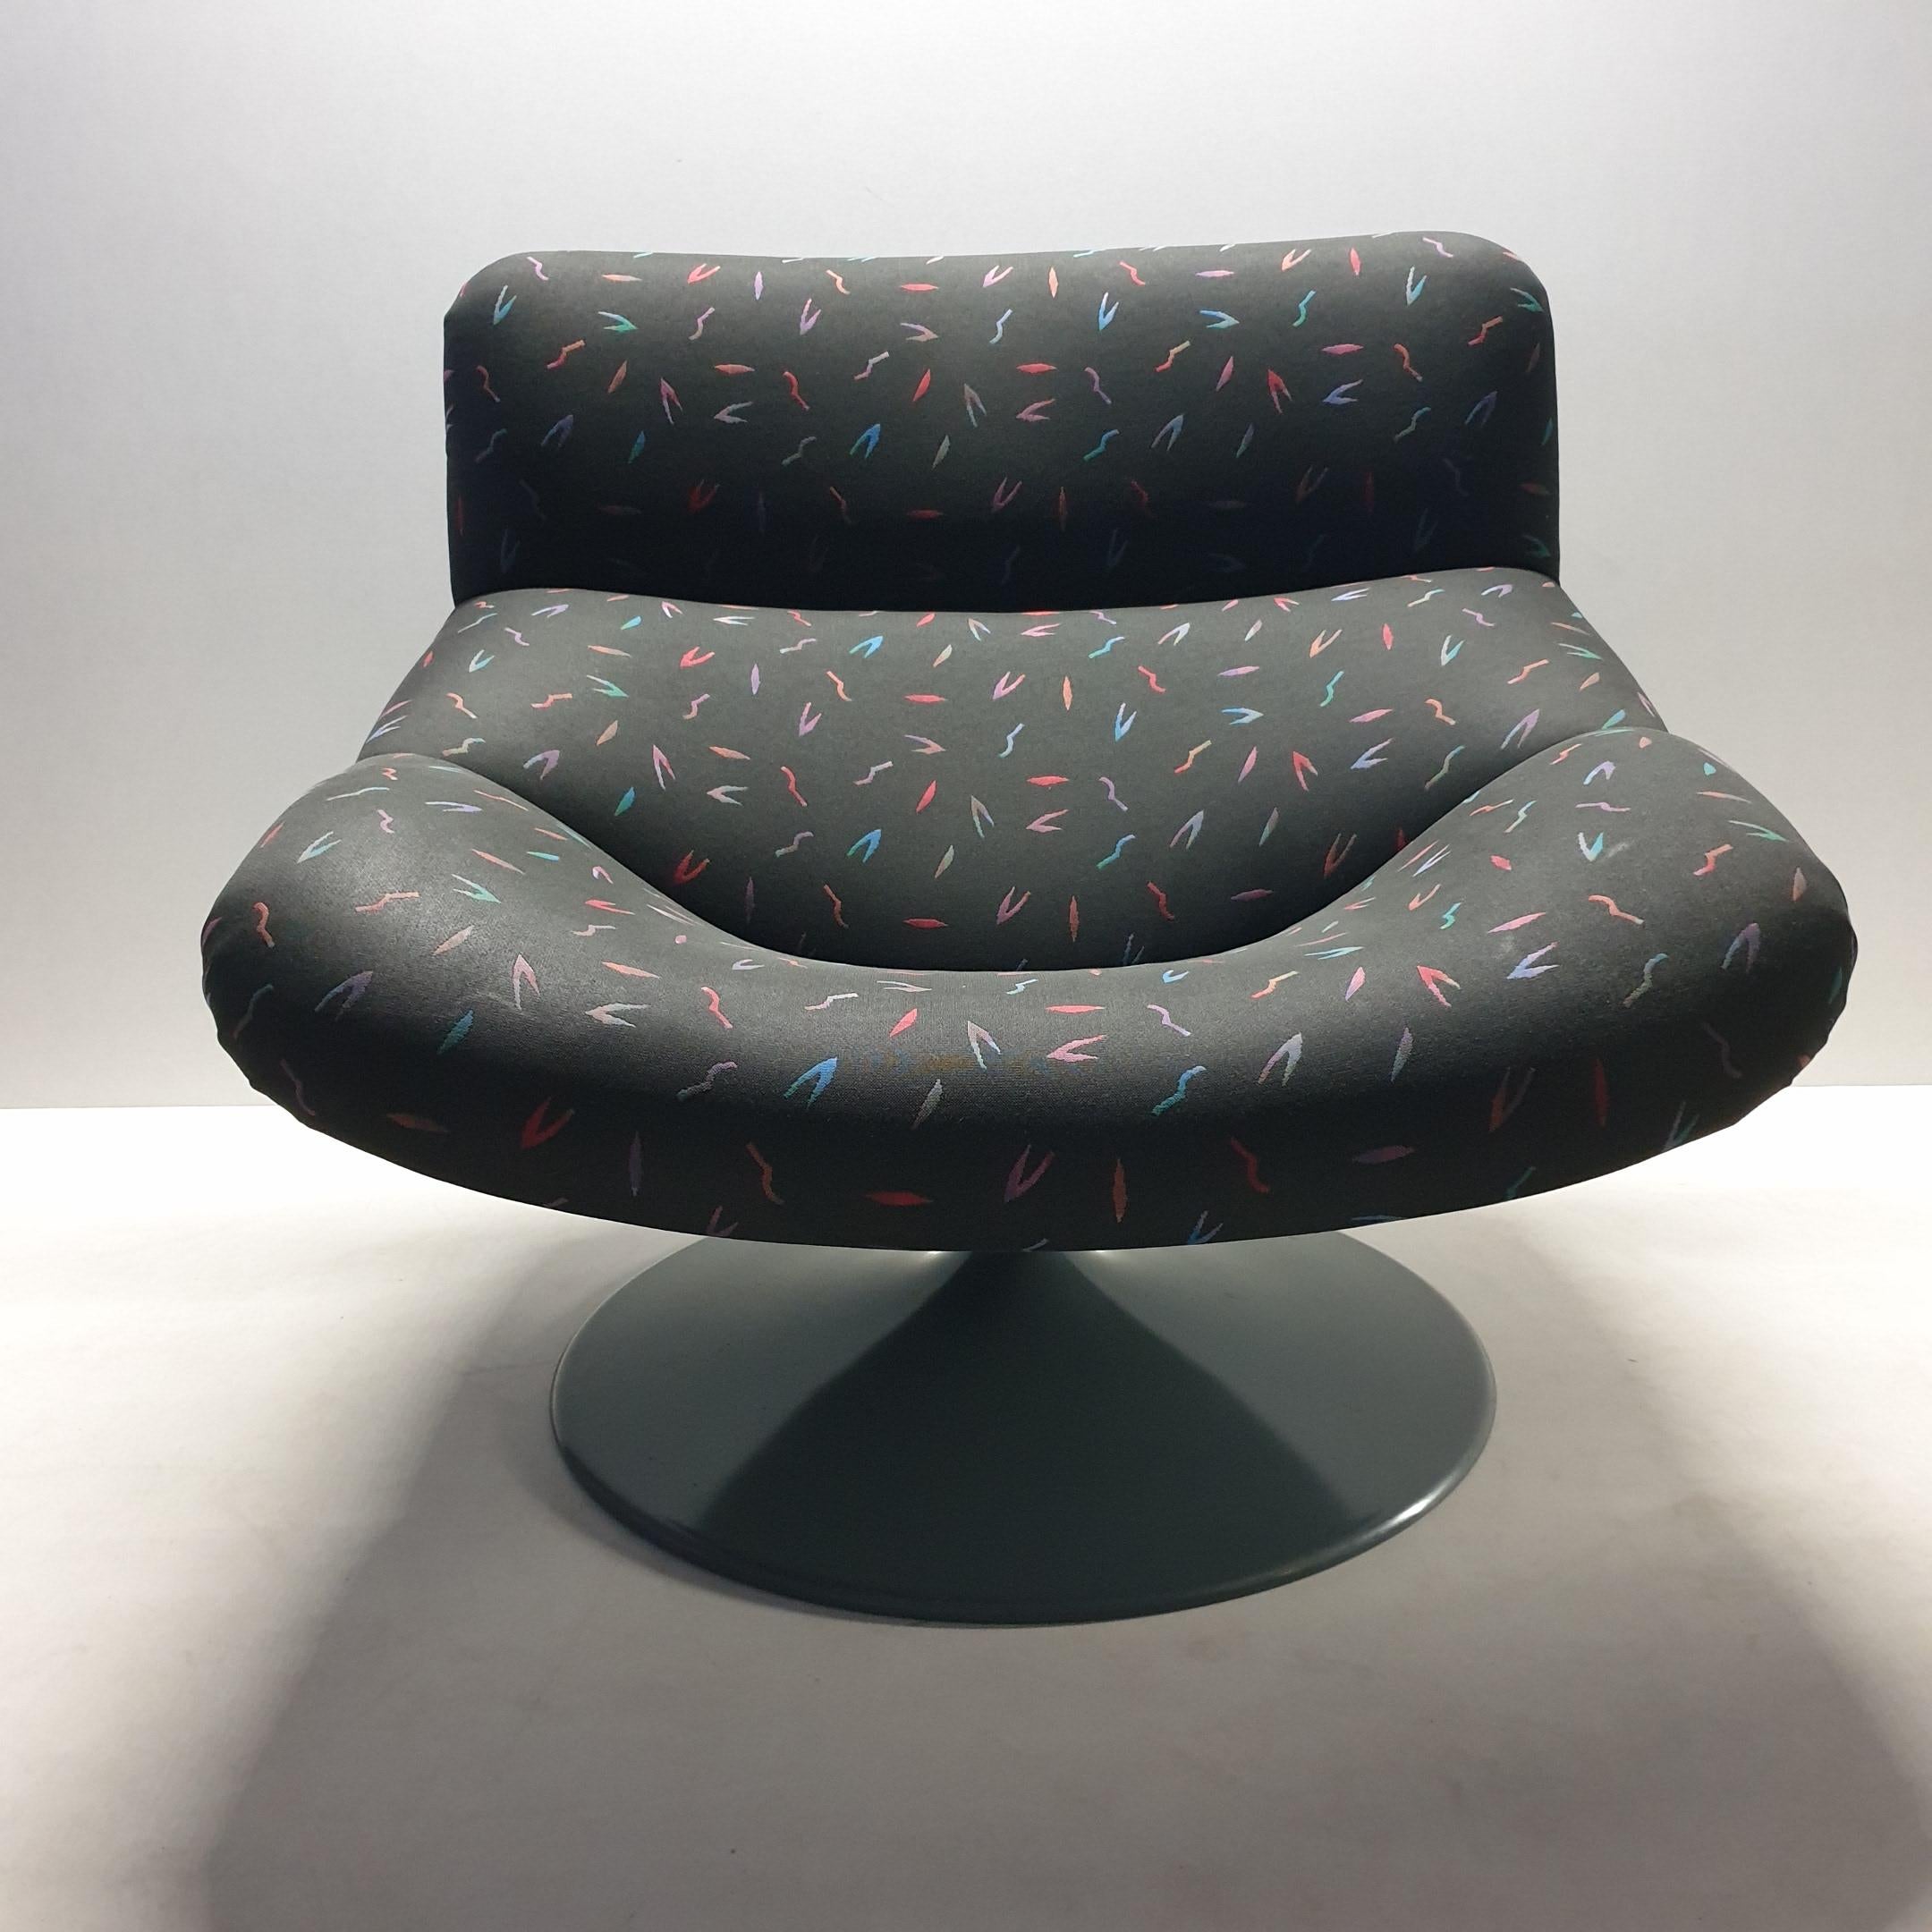 Swivel lounge chair F518 by Geoffrey Harcourt for Artifort.
The largest version.
In very good vintage condition.